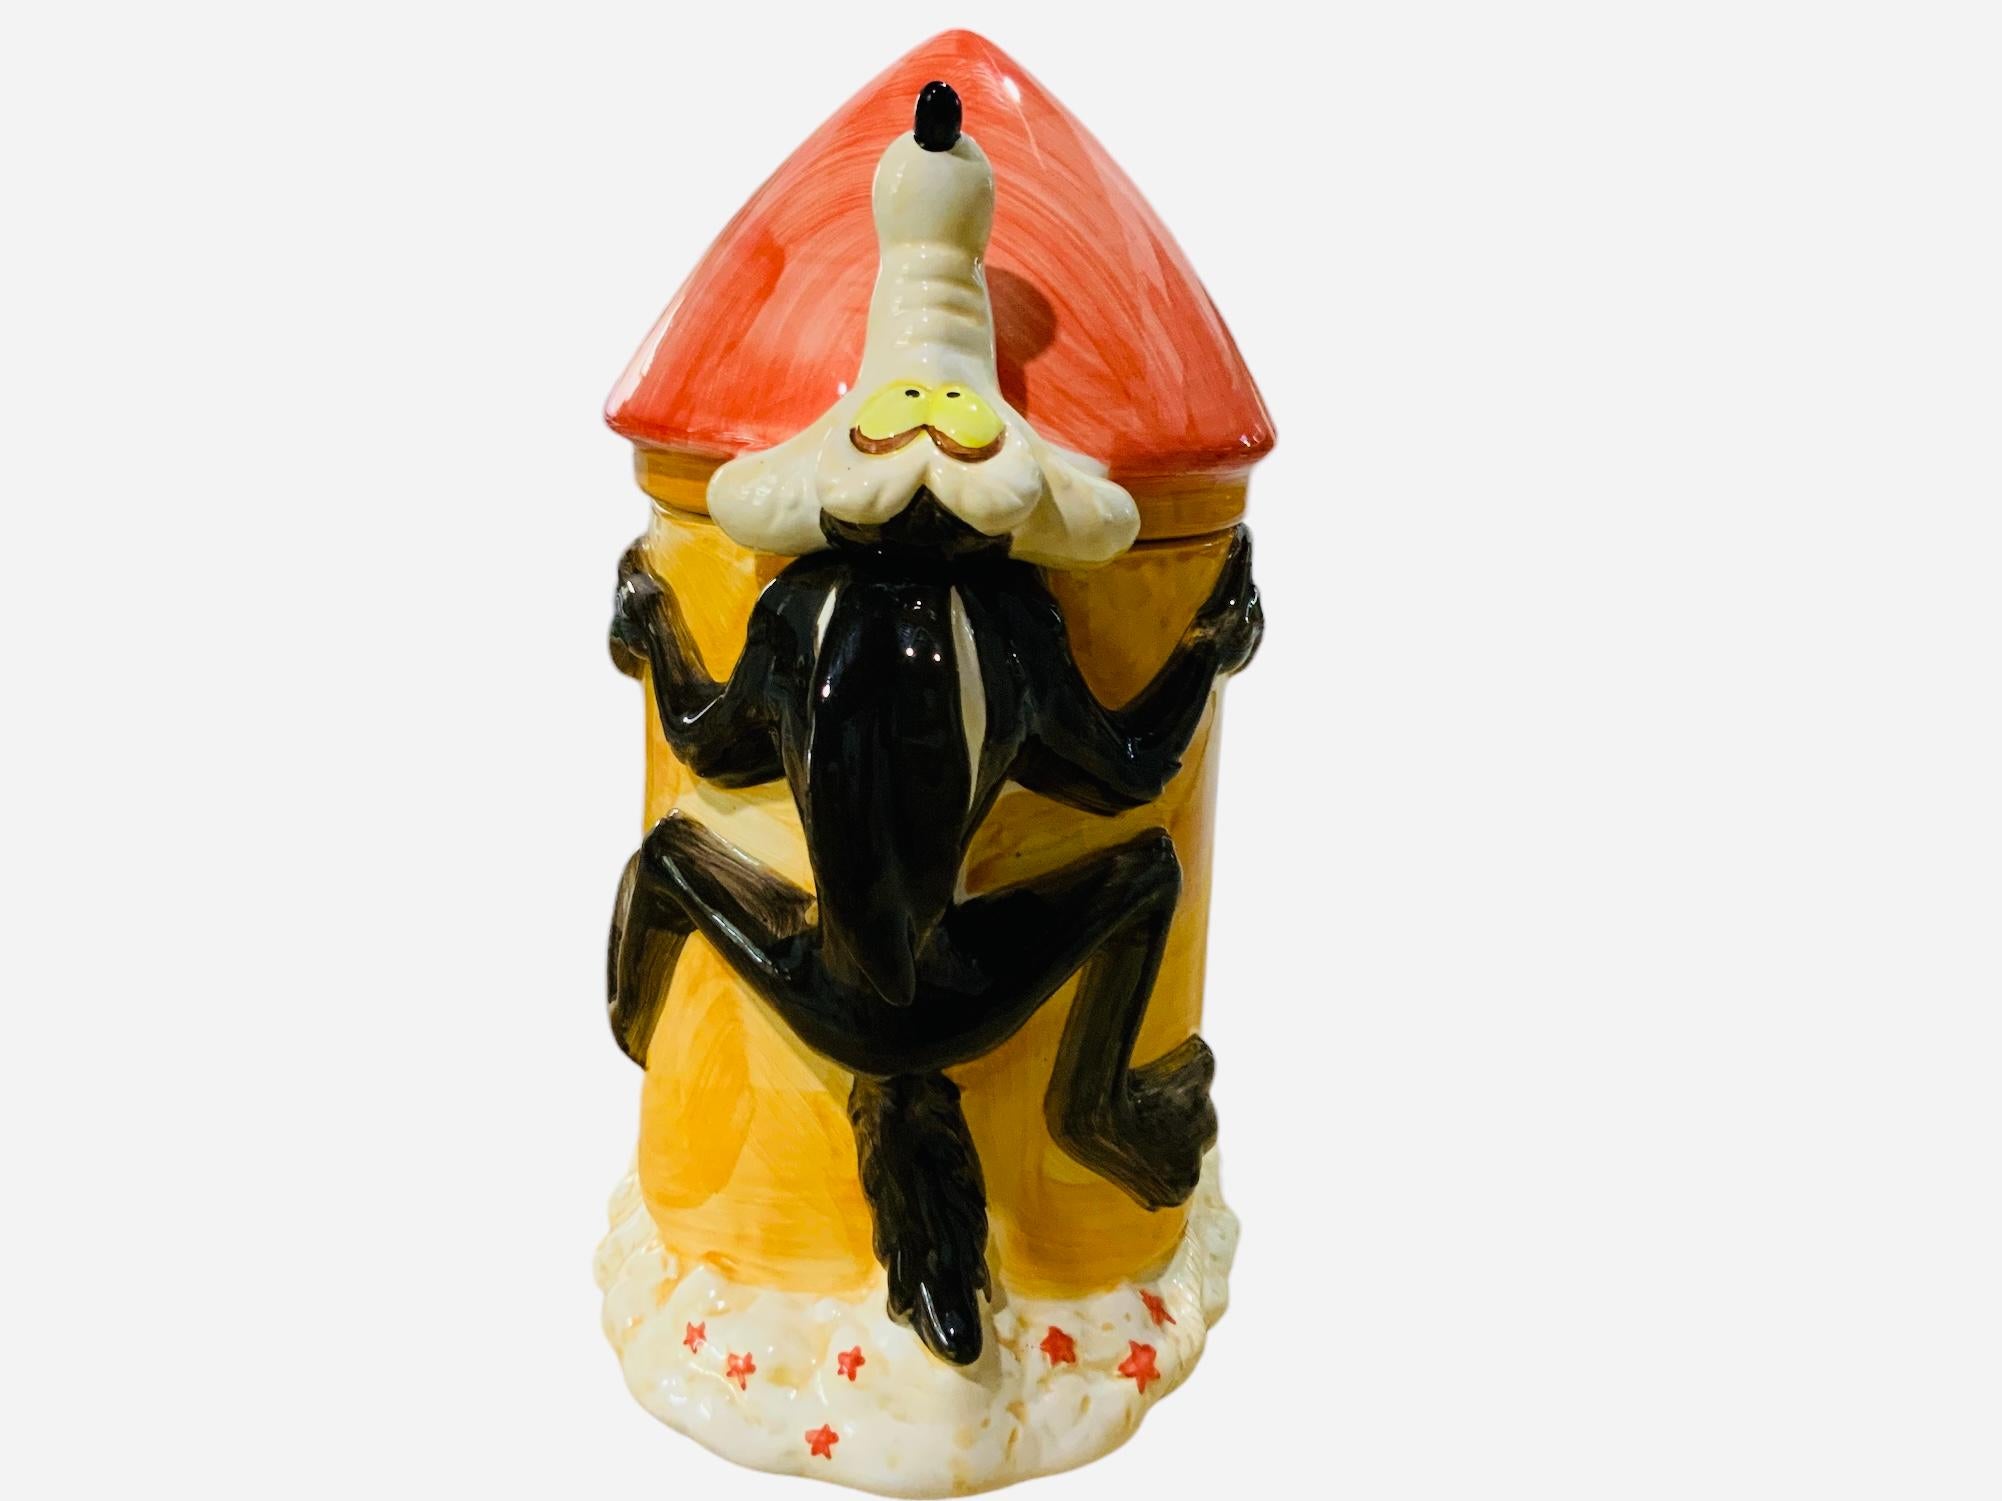 This is a Warner Bros, Looney Tunes Wile E. Coyote Rocket Cookie Jar. It depicts a hand painted ceramic cookie jar shaped as Wile E. Coyote ACME Rocket. Below the base is hallmarked TM & C; Warner Bros, Taiwan.